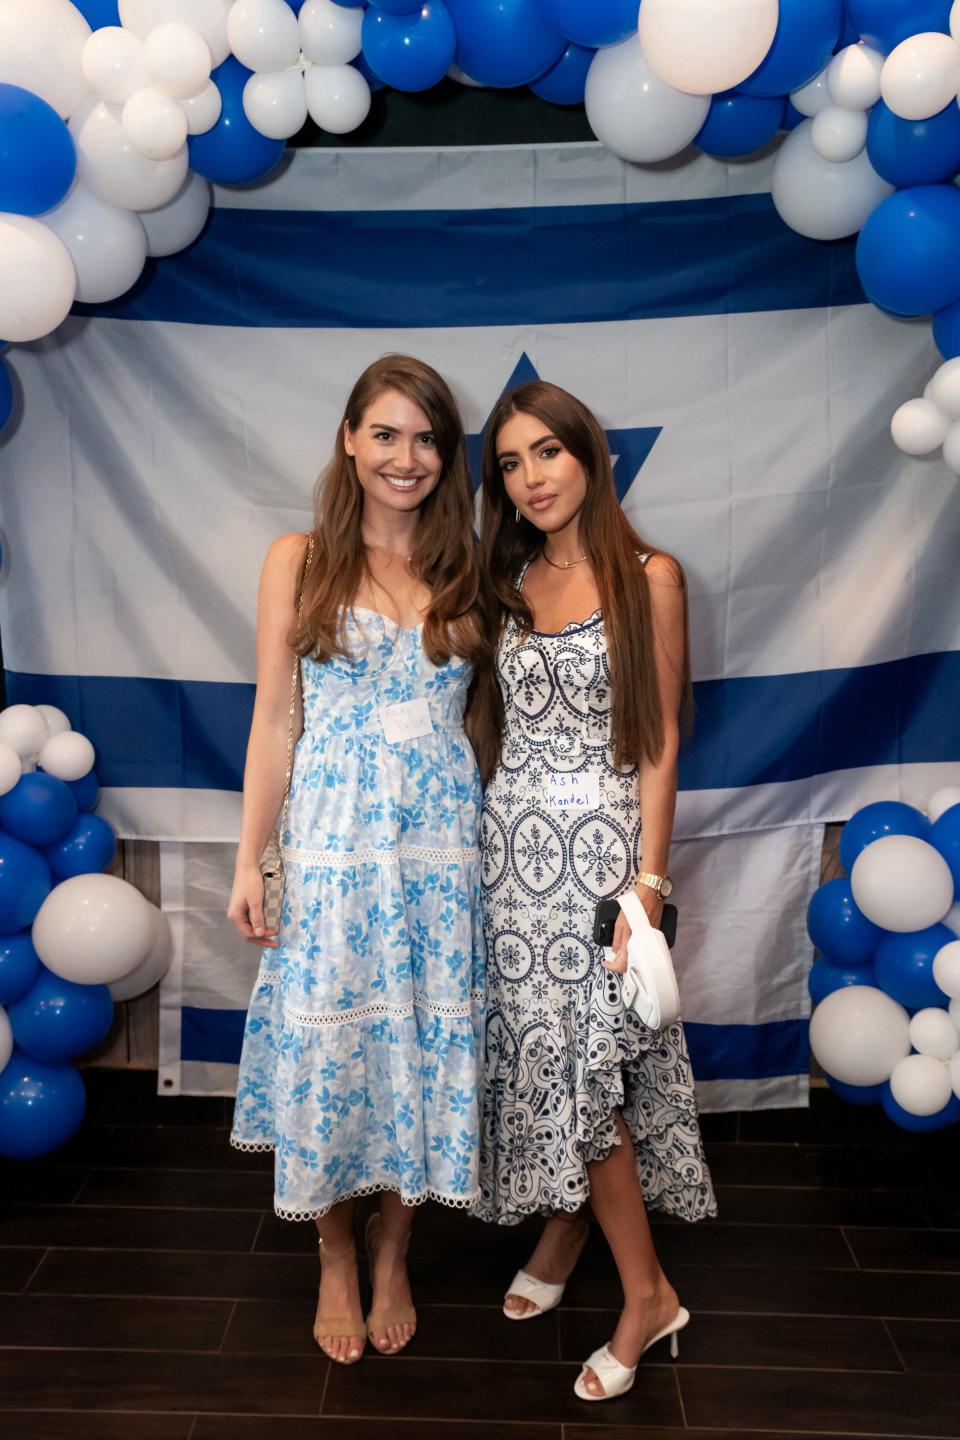 Hailey Desser, of Delray Beach, and Ashley Kandel, of Boca Raton, at a happy hour fundraising event for Israel planned by Desser on Oct. 19 at Osha Thai and Sushi Bar in Boca Raton. The event was hosted by The South Florida Jewish Social Network, a Facebook group Desser founded, and The Jewish National Fund (JNF) USA.